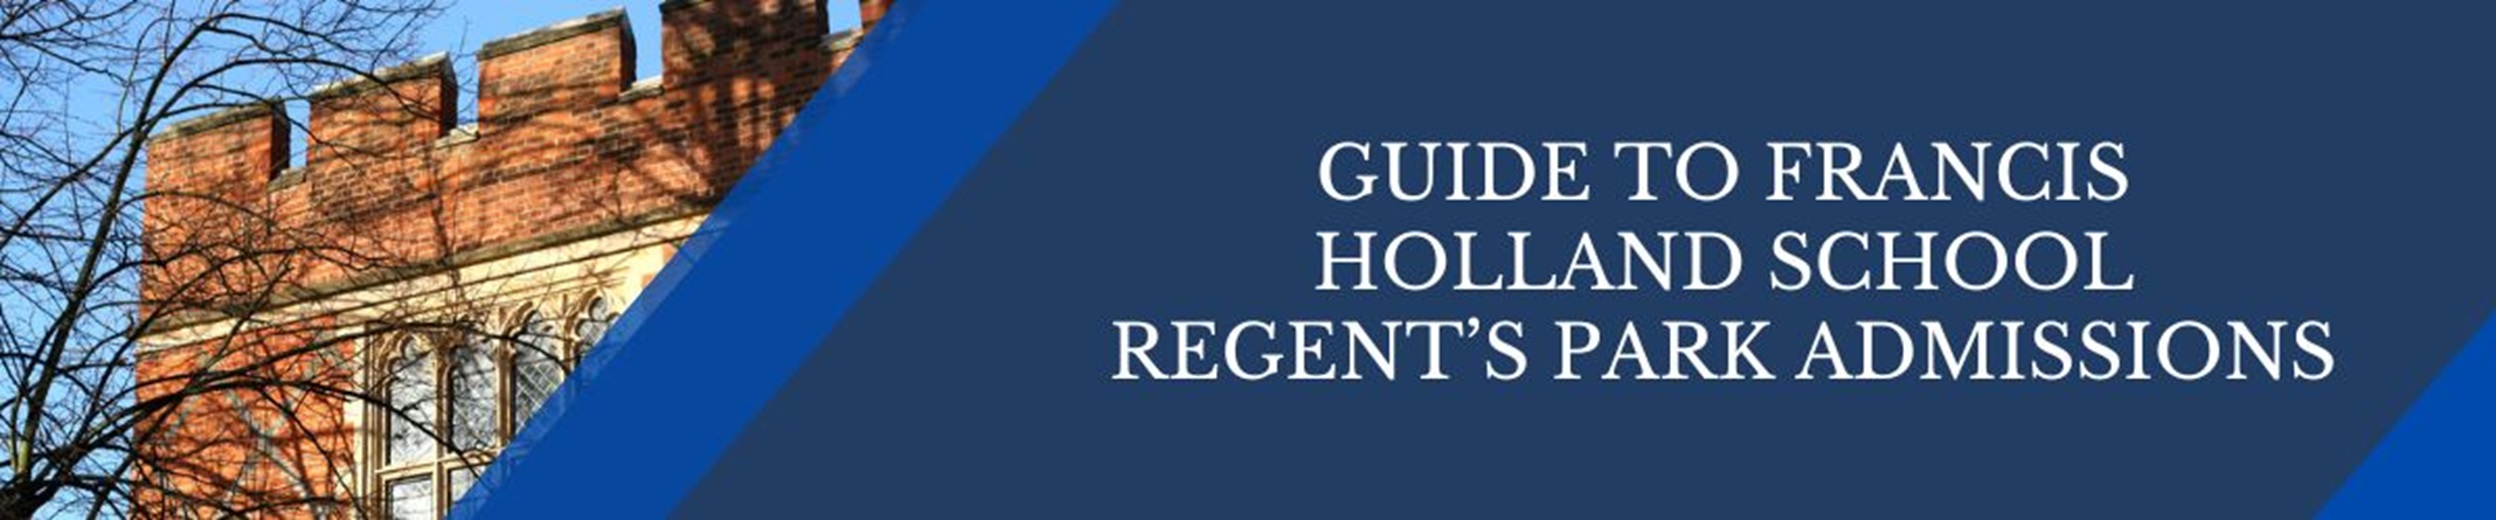 A Guide to Francis Holland School Regent’s Park Admissions